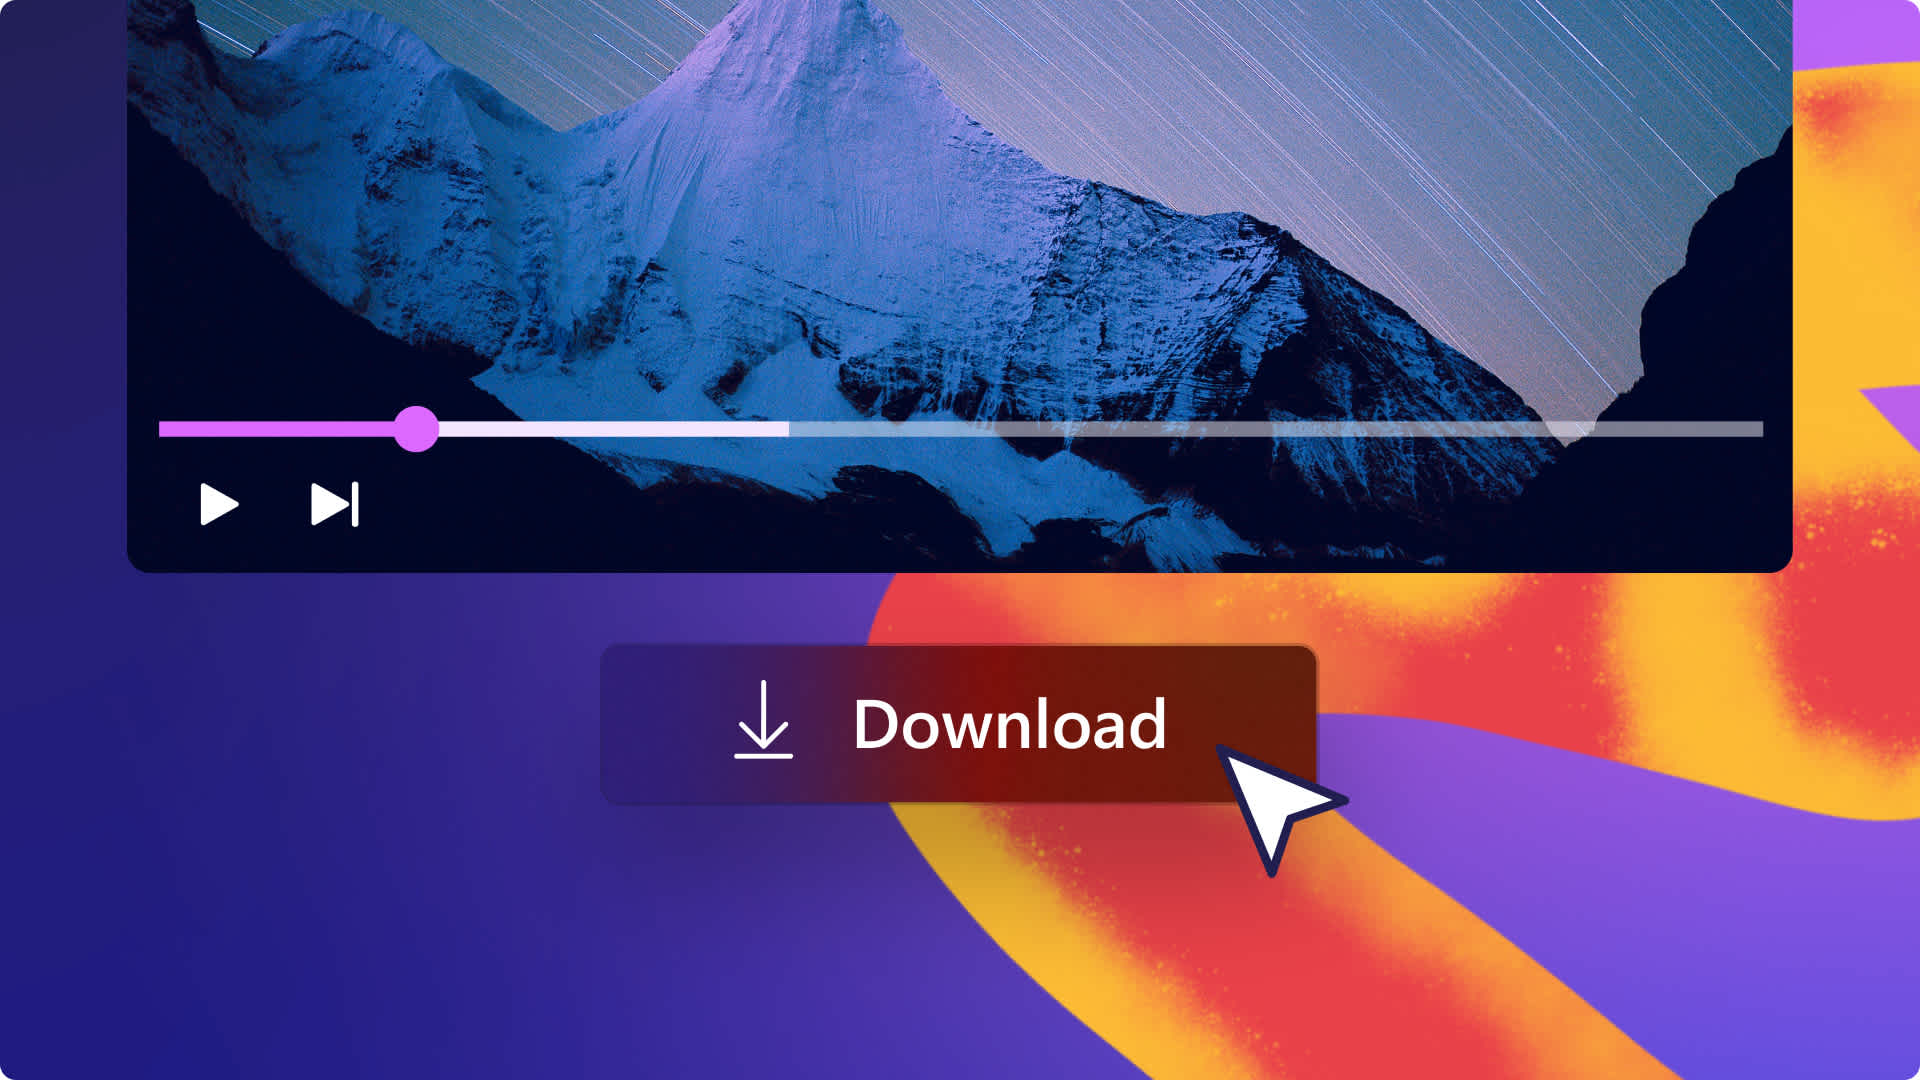  How to Download